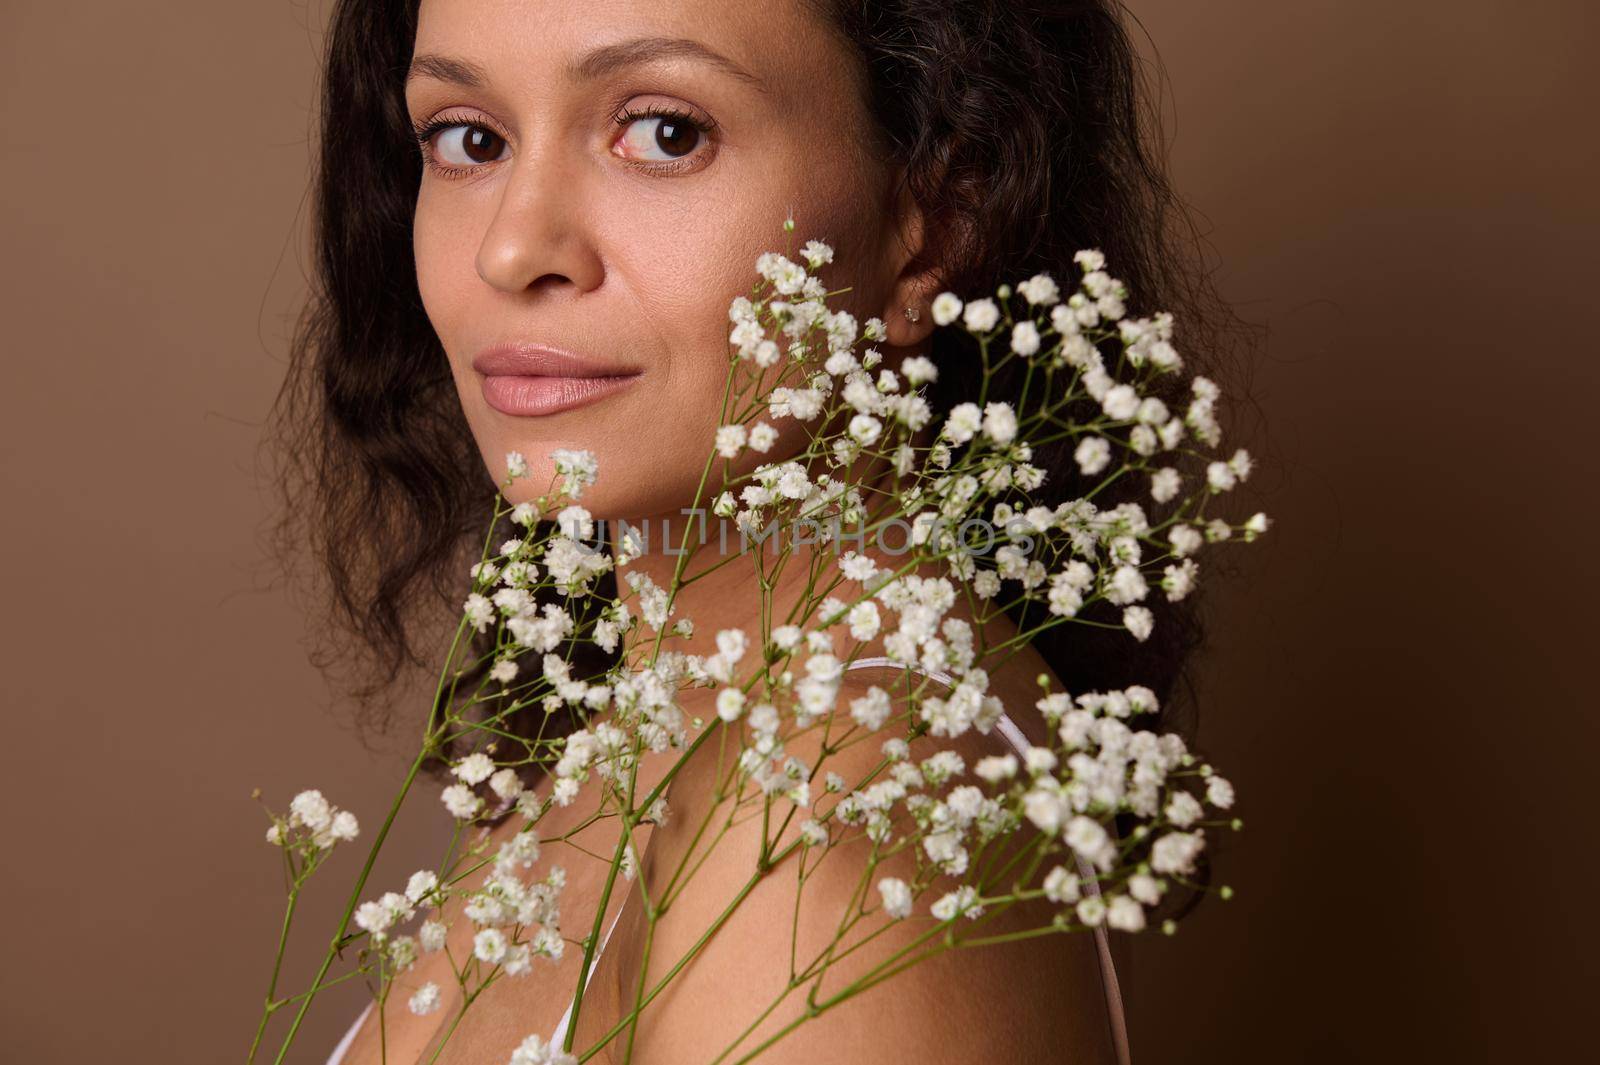 Close-up portrait. Beautiful woman with white gypsophila sprig standing three-quarters against brown background looking confidently at camera. Body care, positivity, femininity, Women's day concept